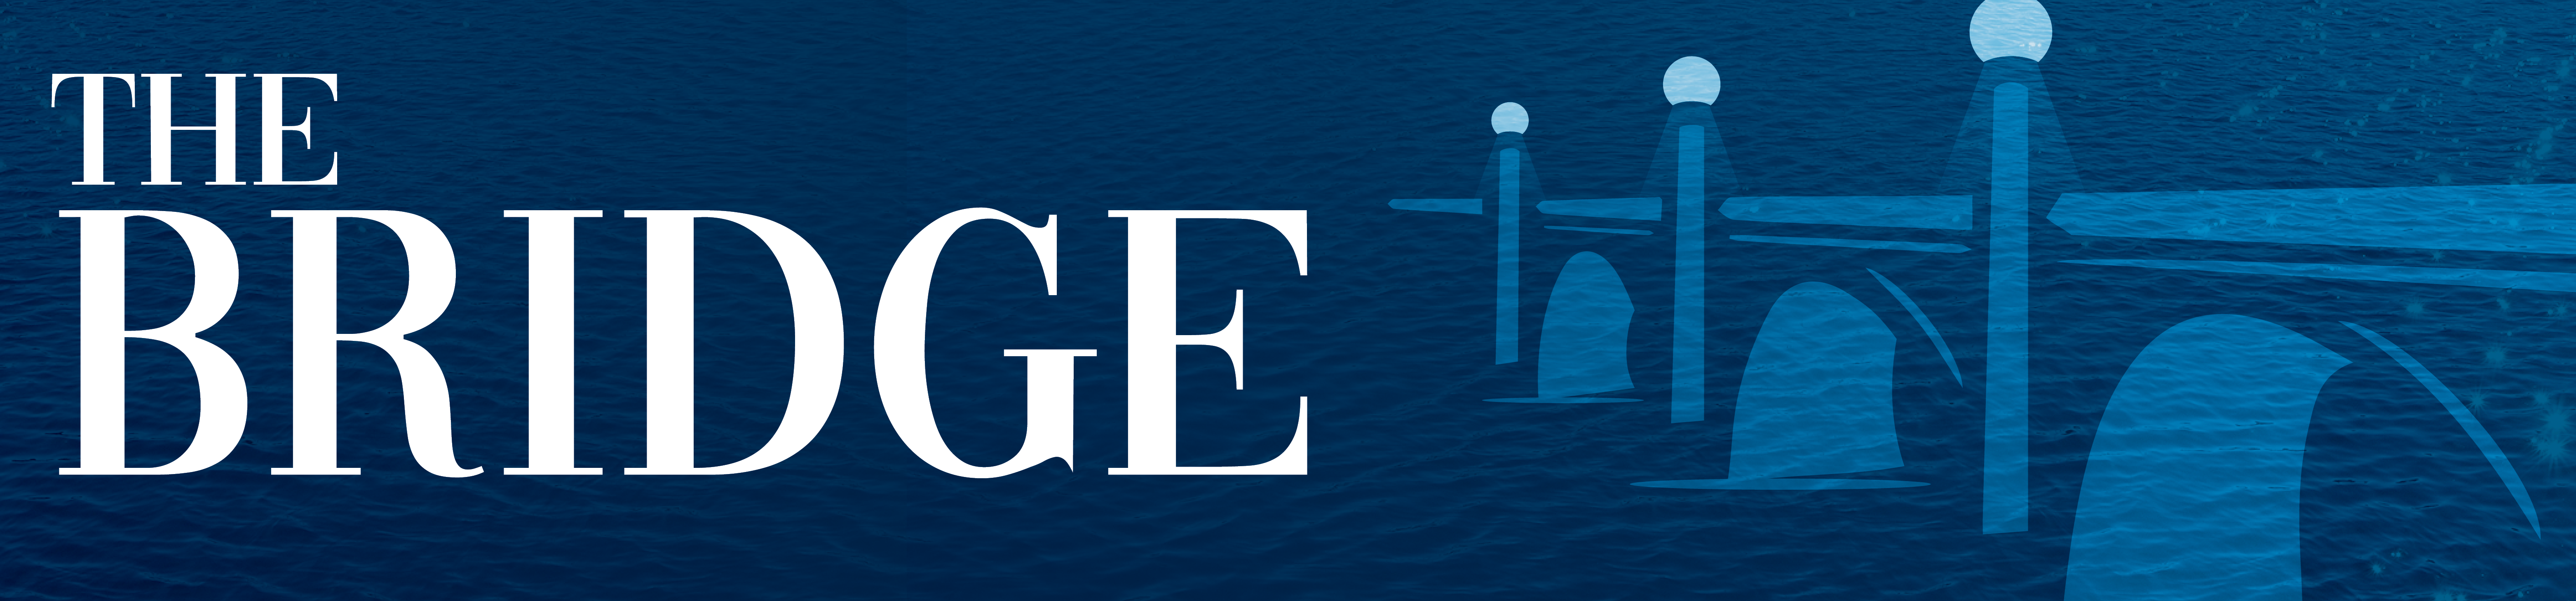 Stylized banner of a bridge over water on blue with logo for the Bridge newsletter